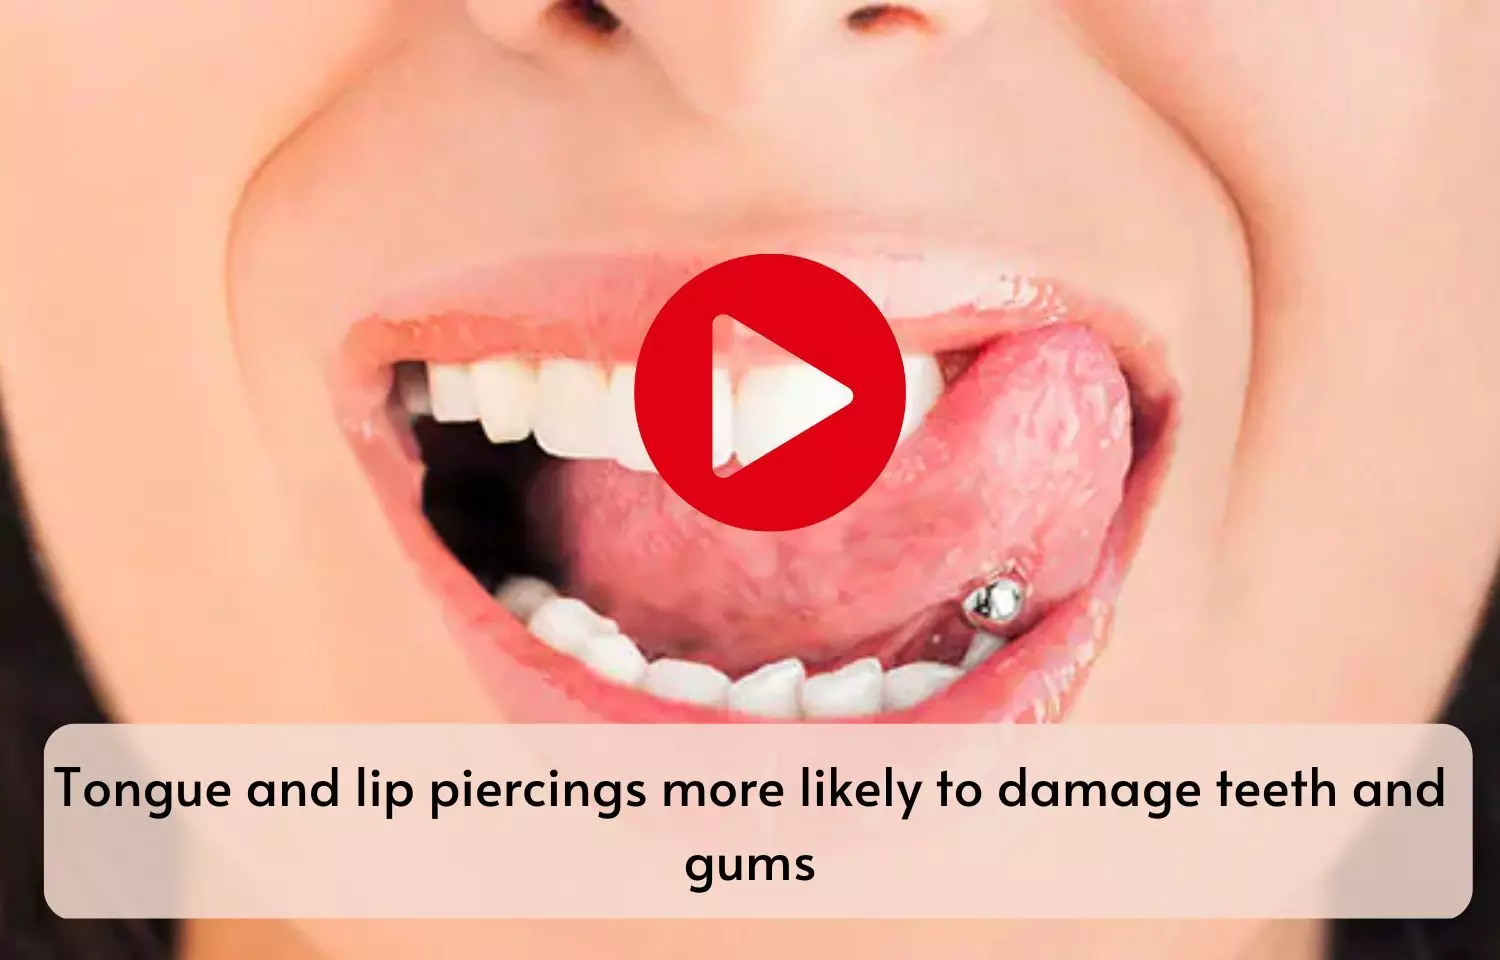 Tongue and lip piercings more likely to damage teeth and gums